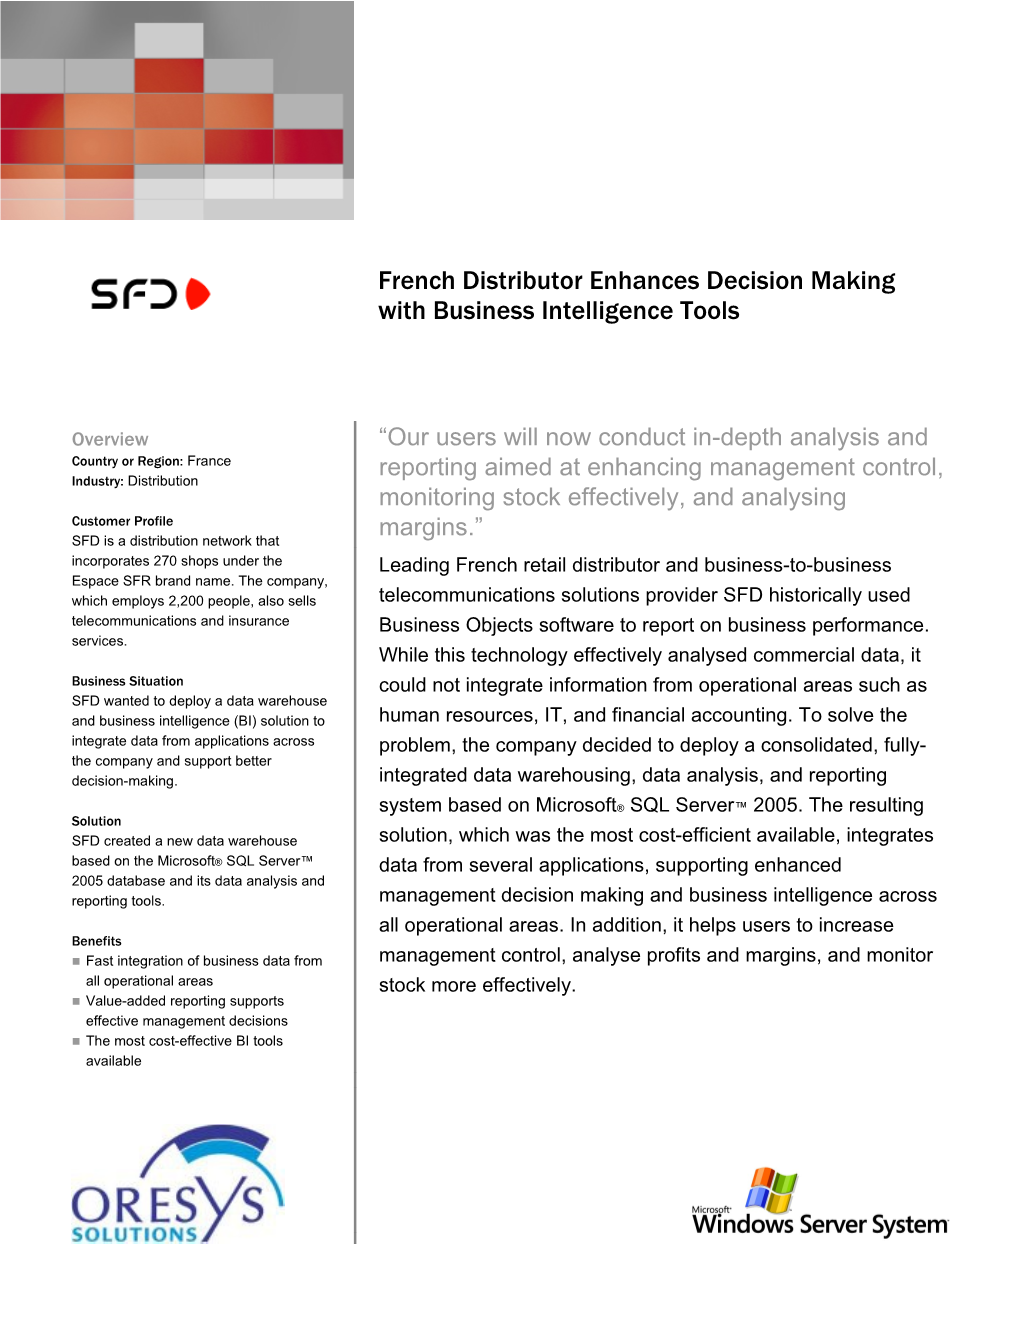 French Distributor Enhances Decision Making with Business Intelligence Tools